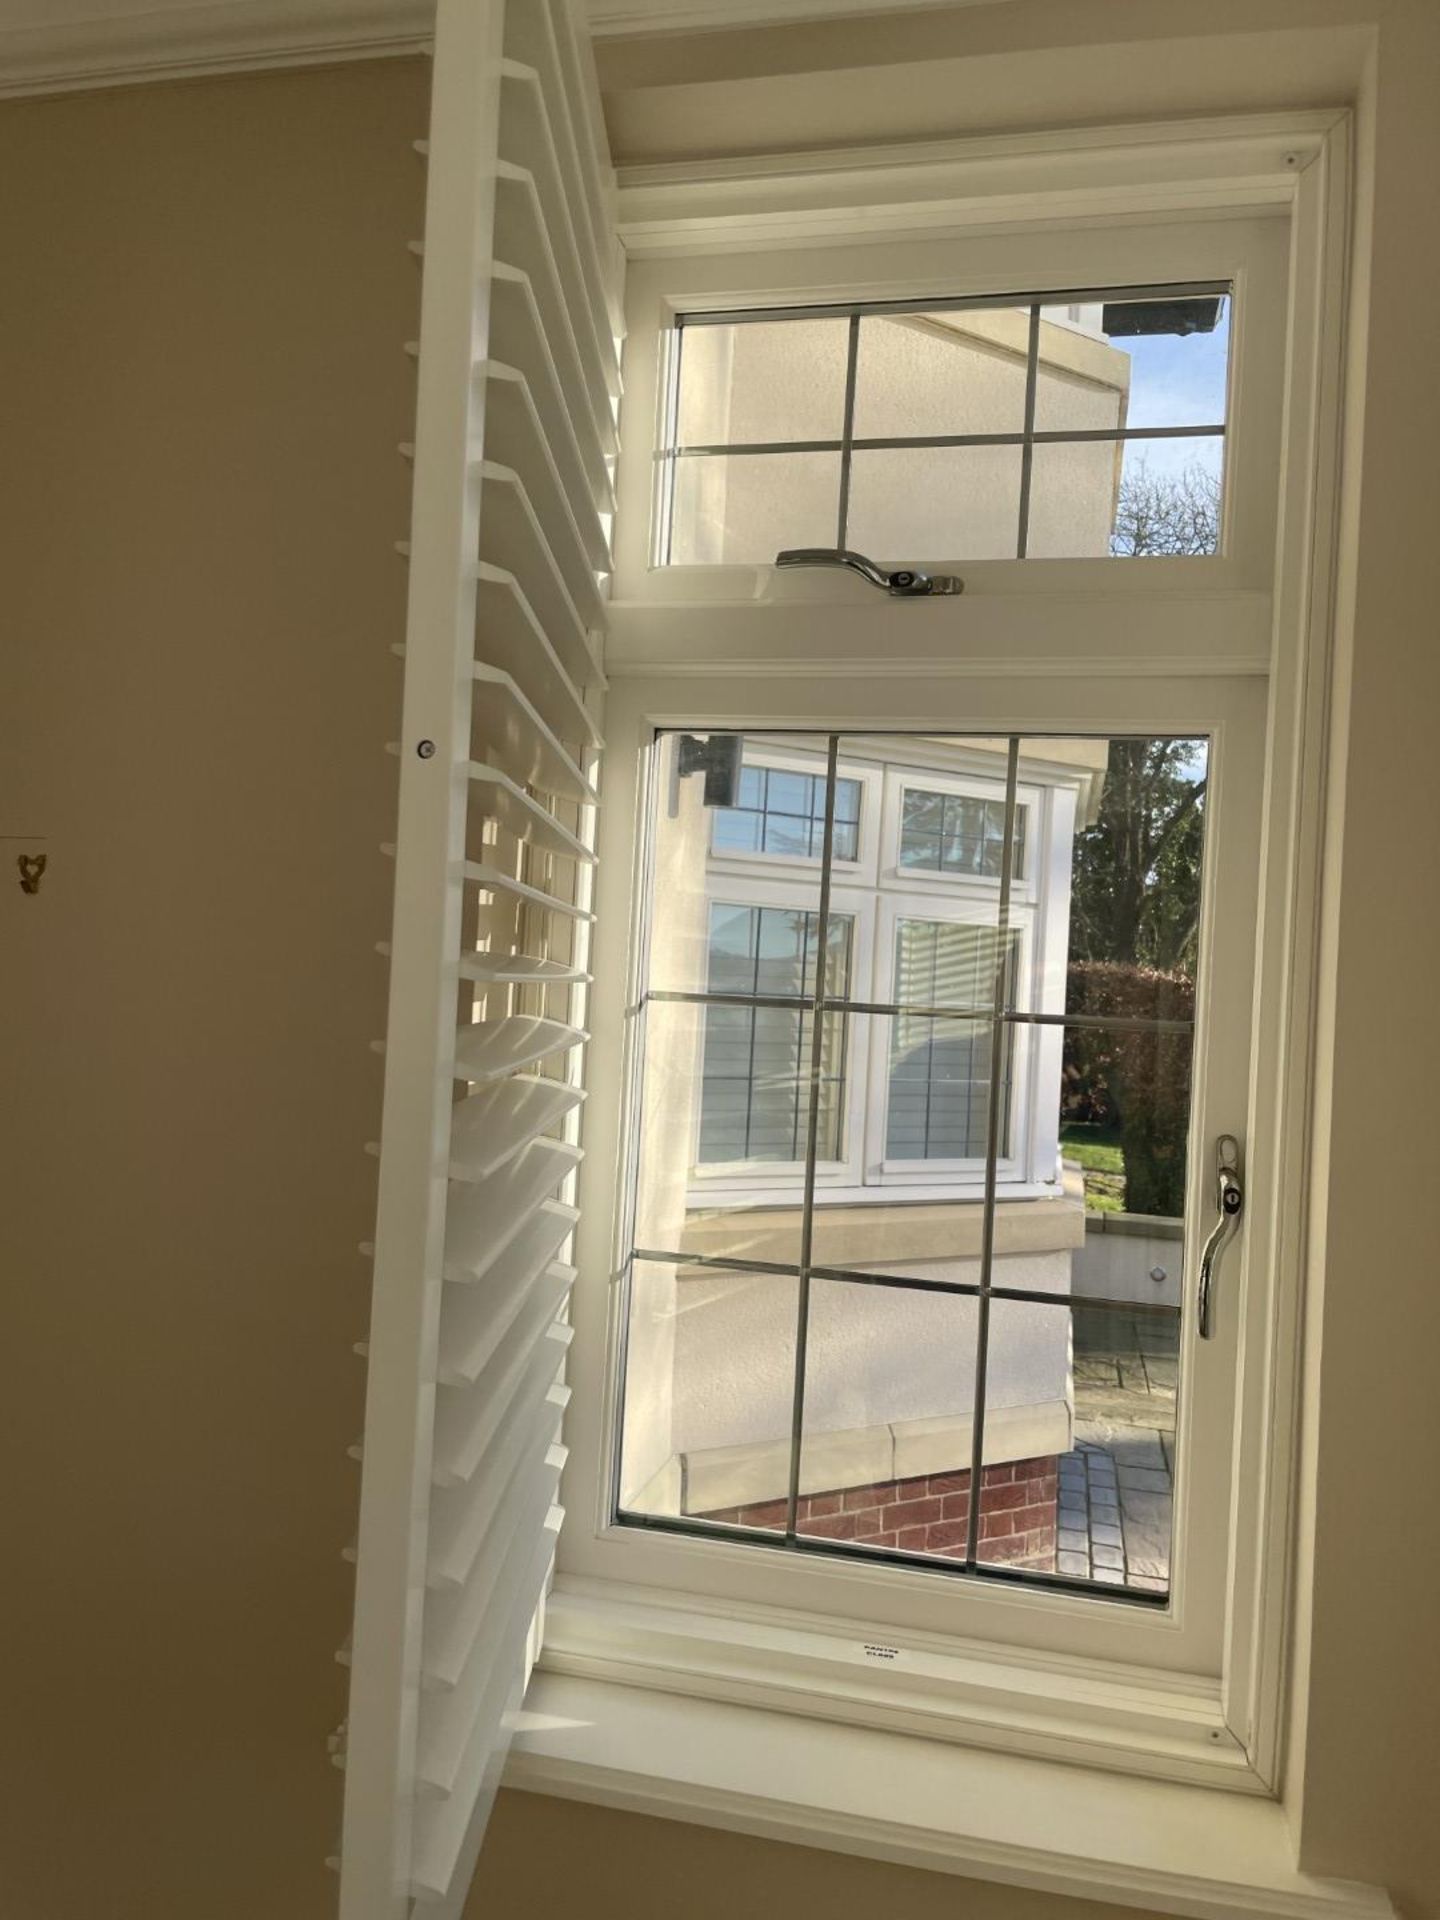 1 x Hardwood Timber Double Glazed Window Frames fitted with Shutter Blinds, In White - Ref: PAN106 - Image 18 of 23